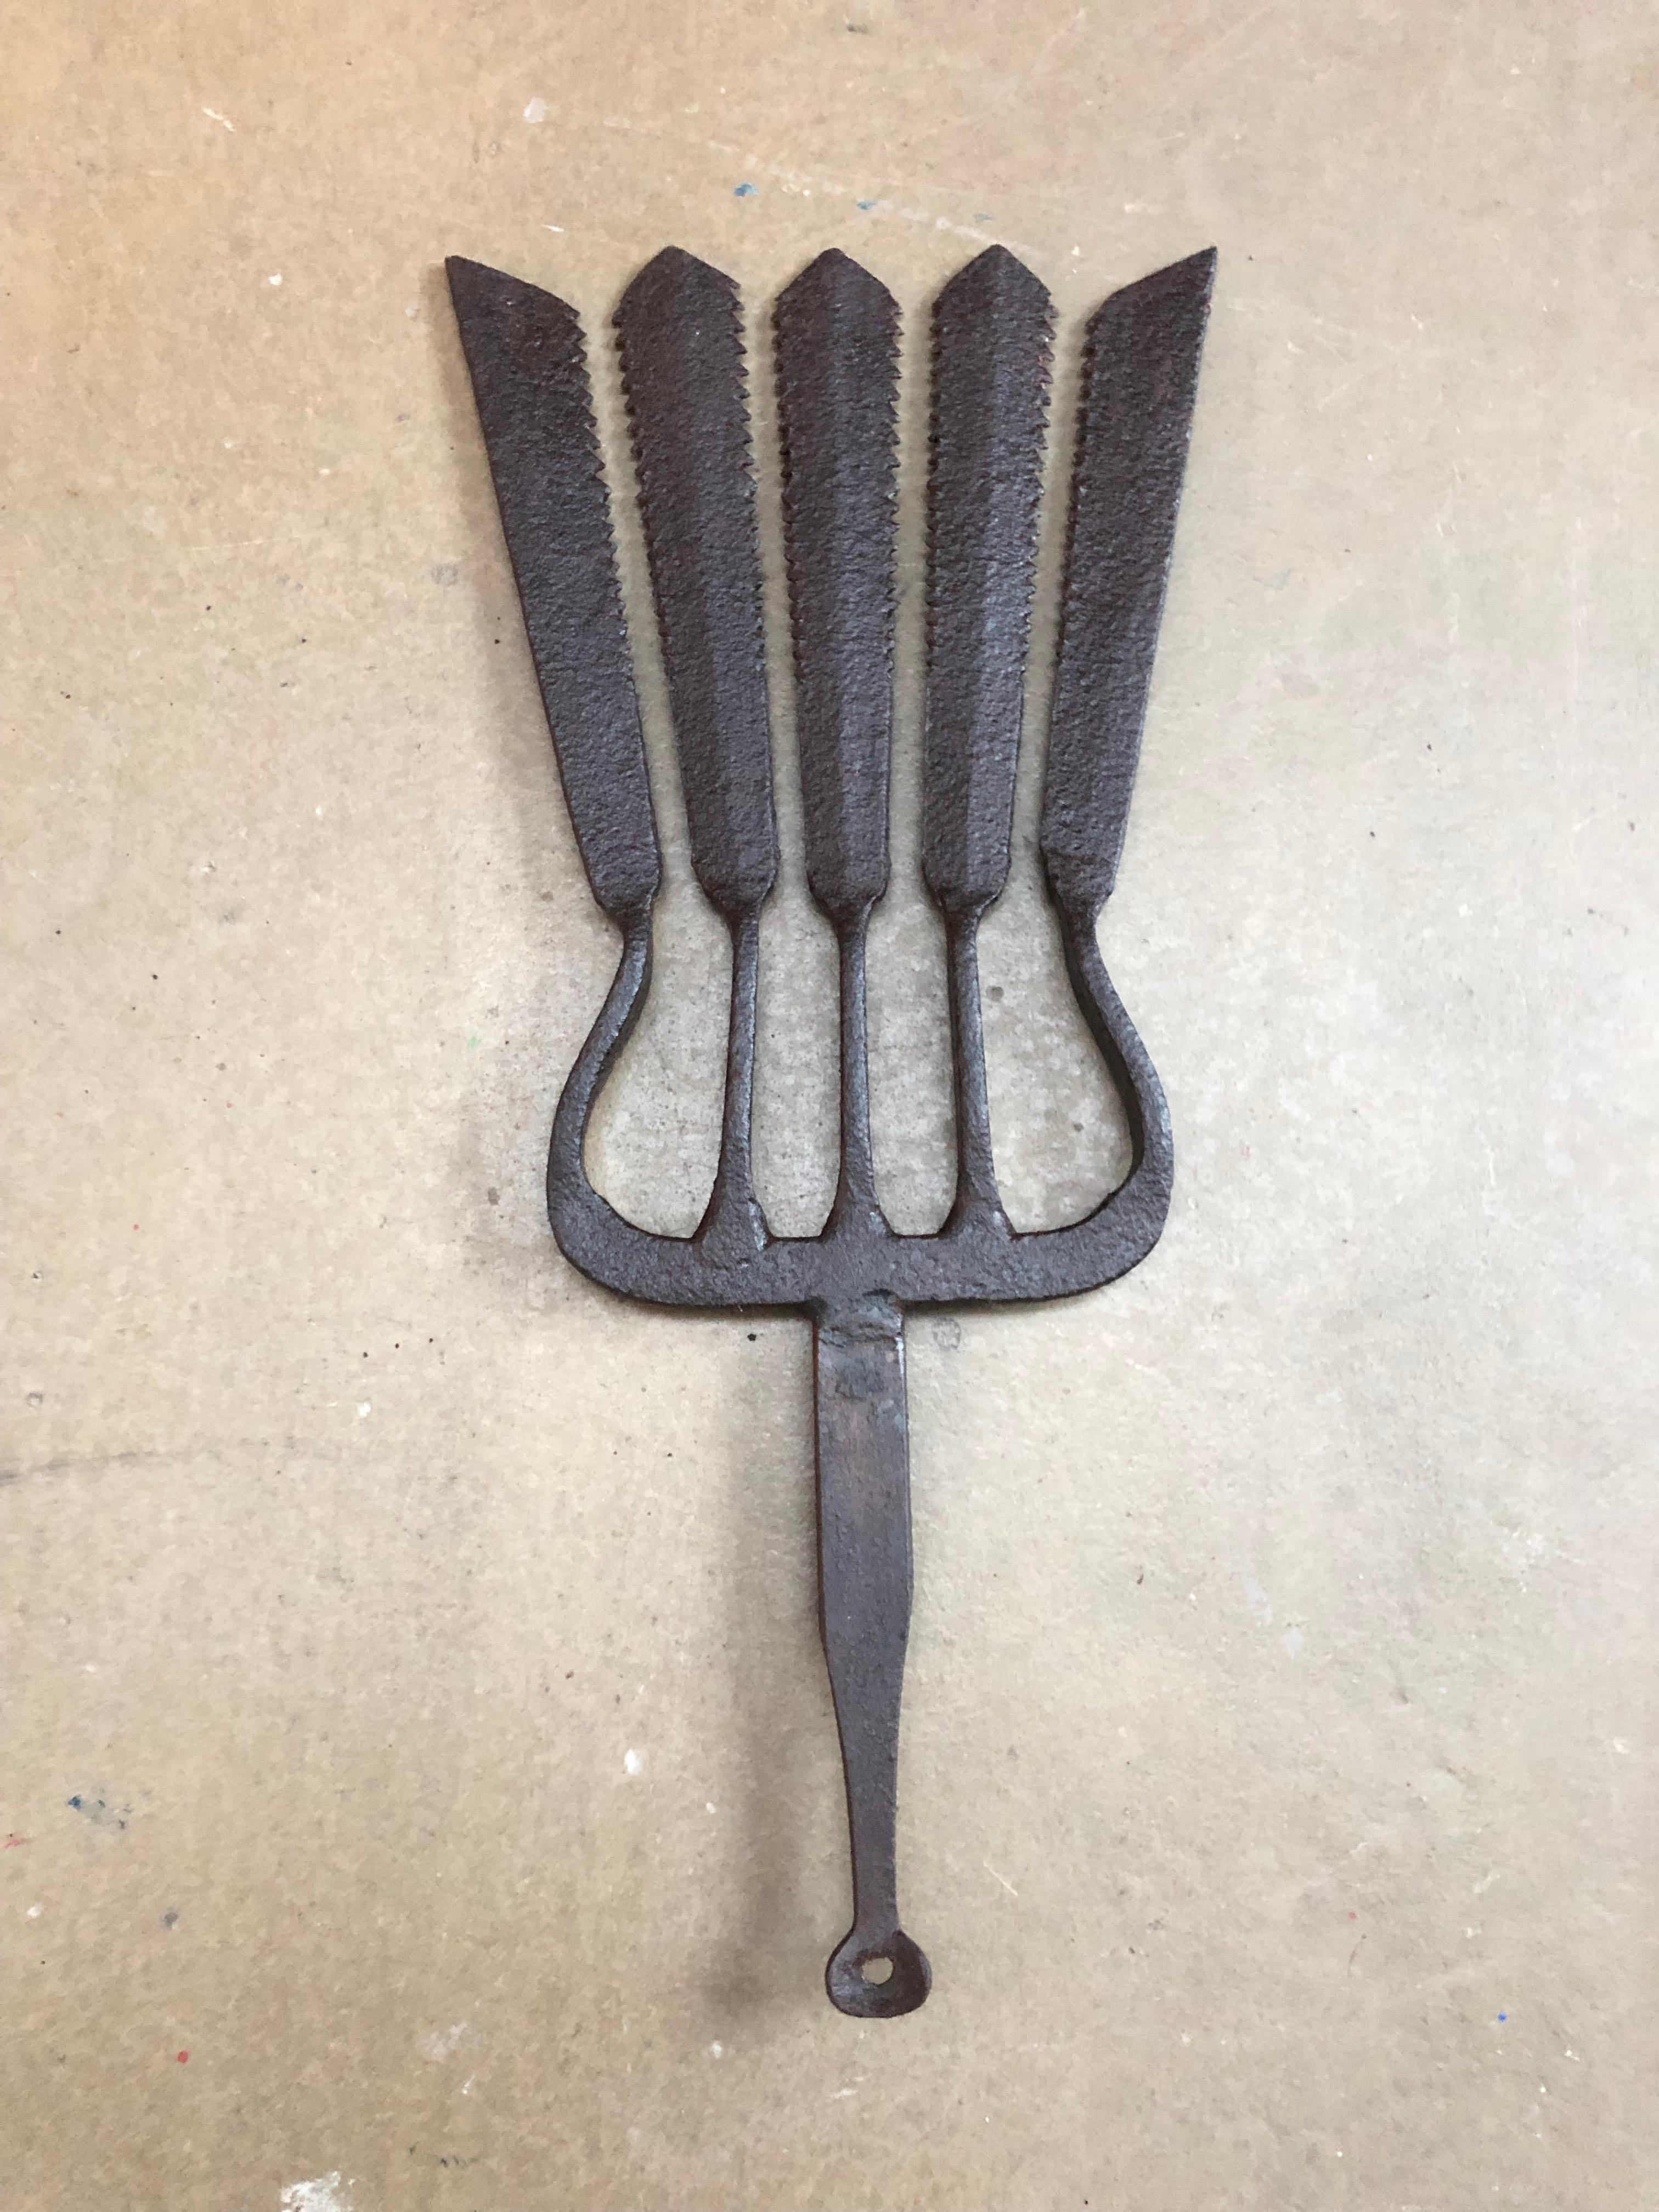 Danish Collection of 5 Antique Wrought Iron Eel Forks For Sale